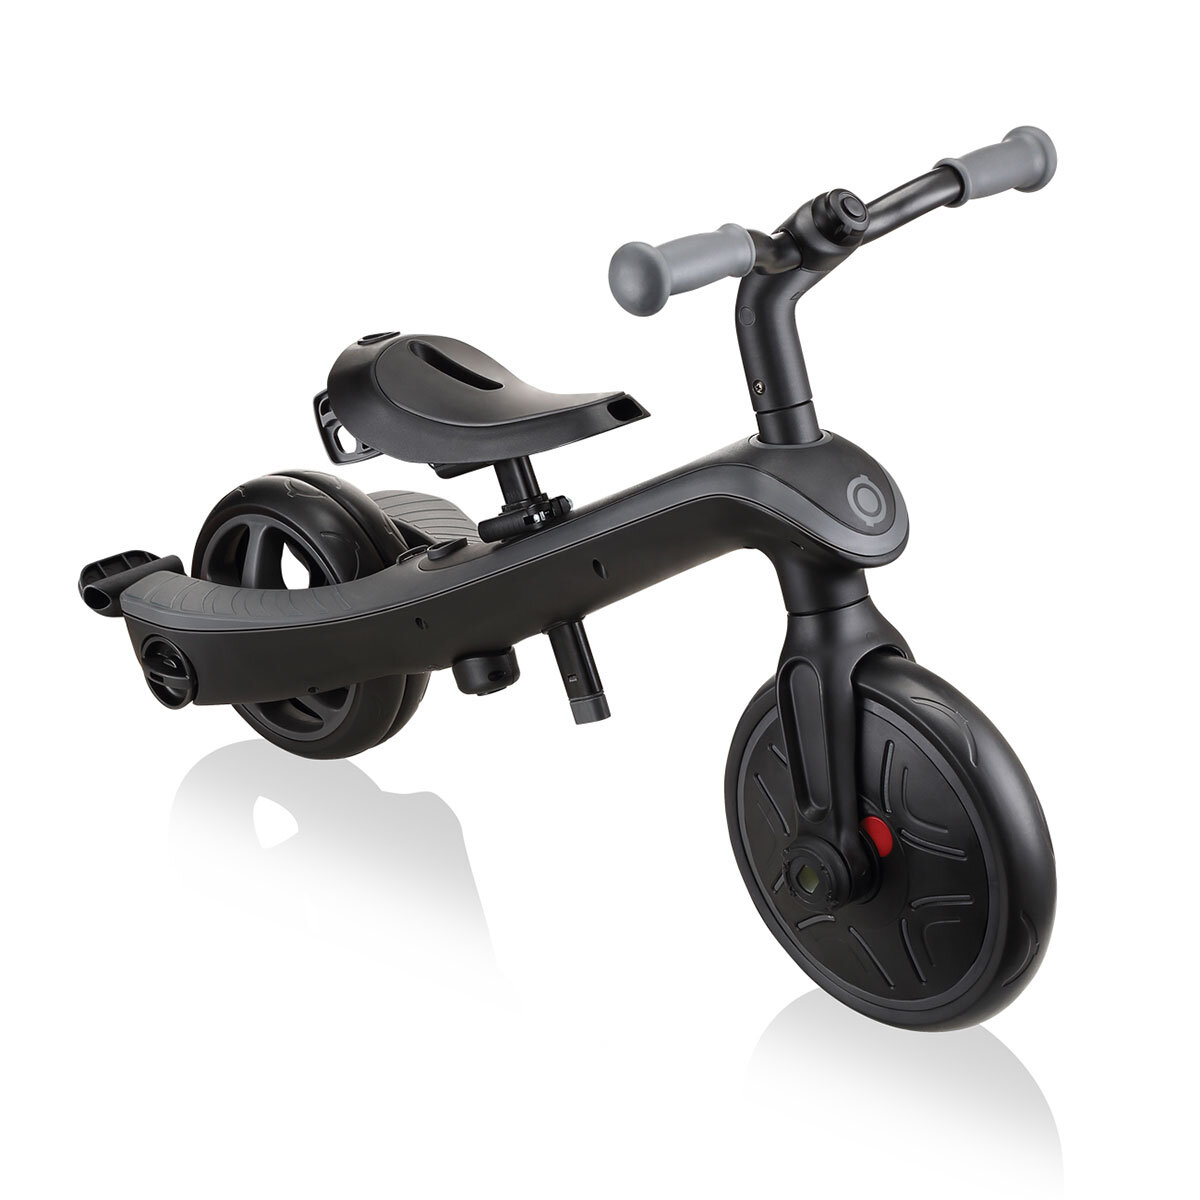 Buy Globber Explorer Trike 4 in 1 Deluxe Play Grey Overview4 Image at Costco.co.uk